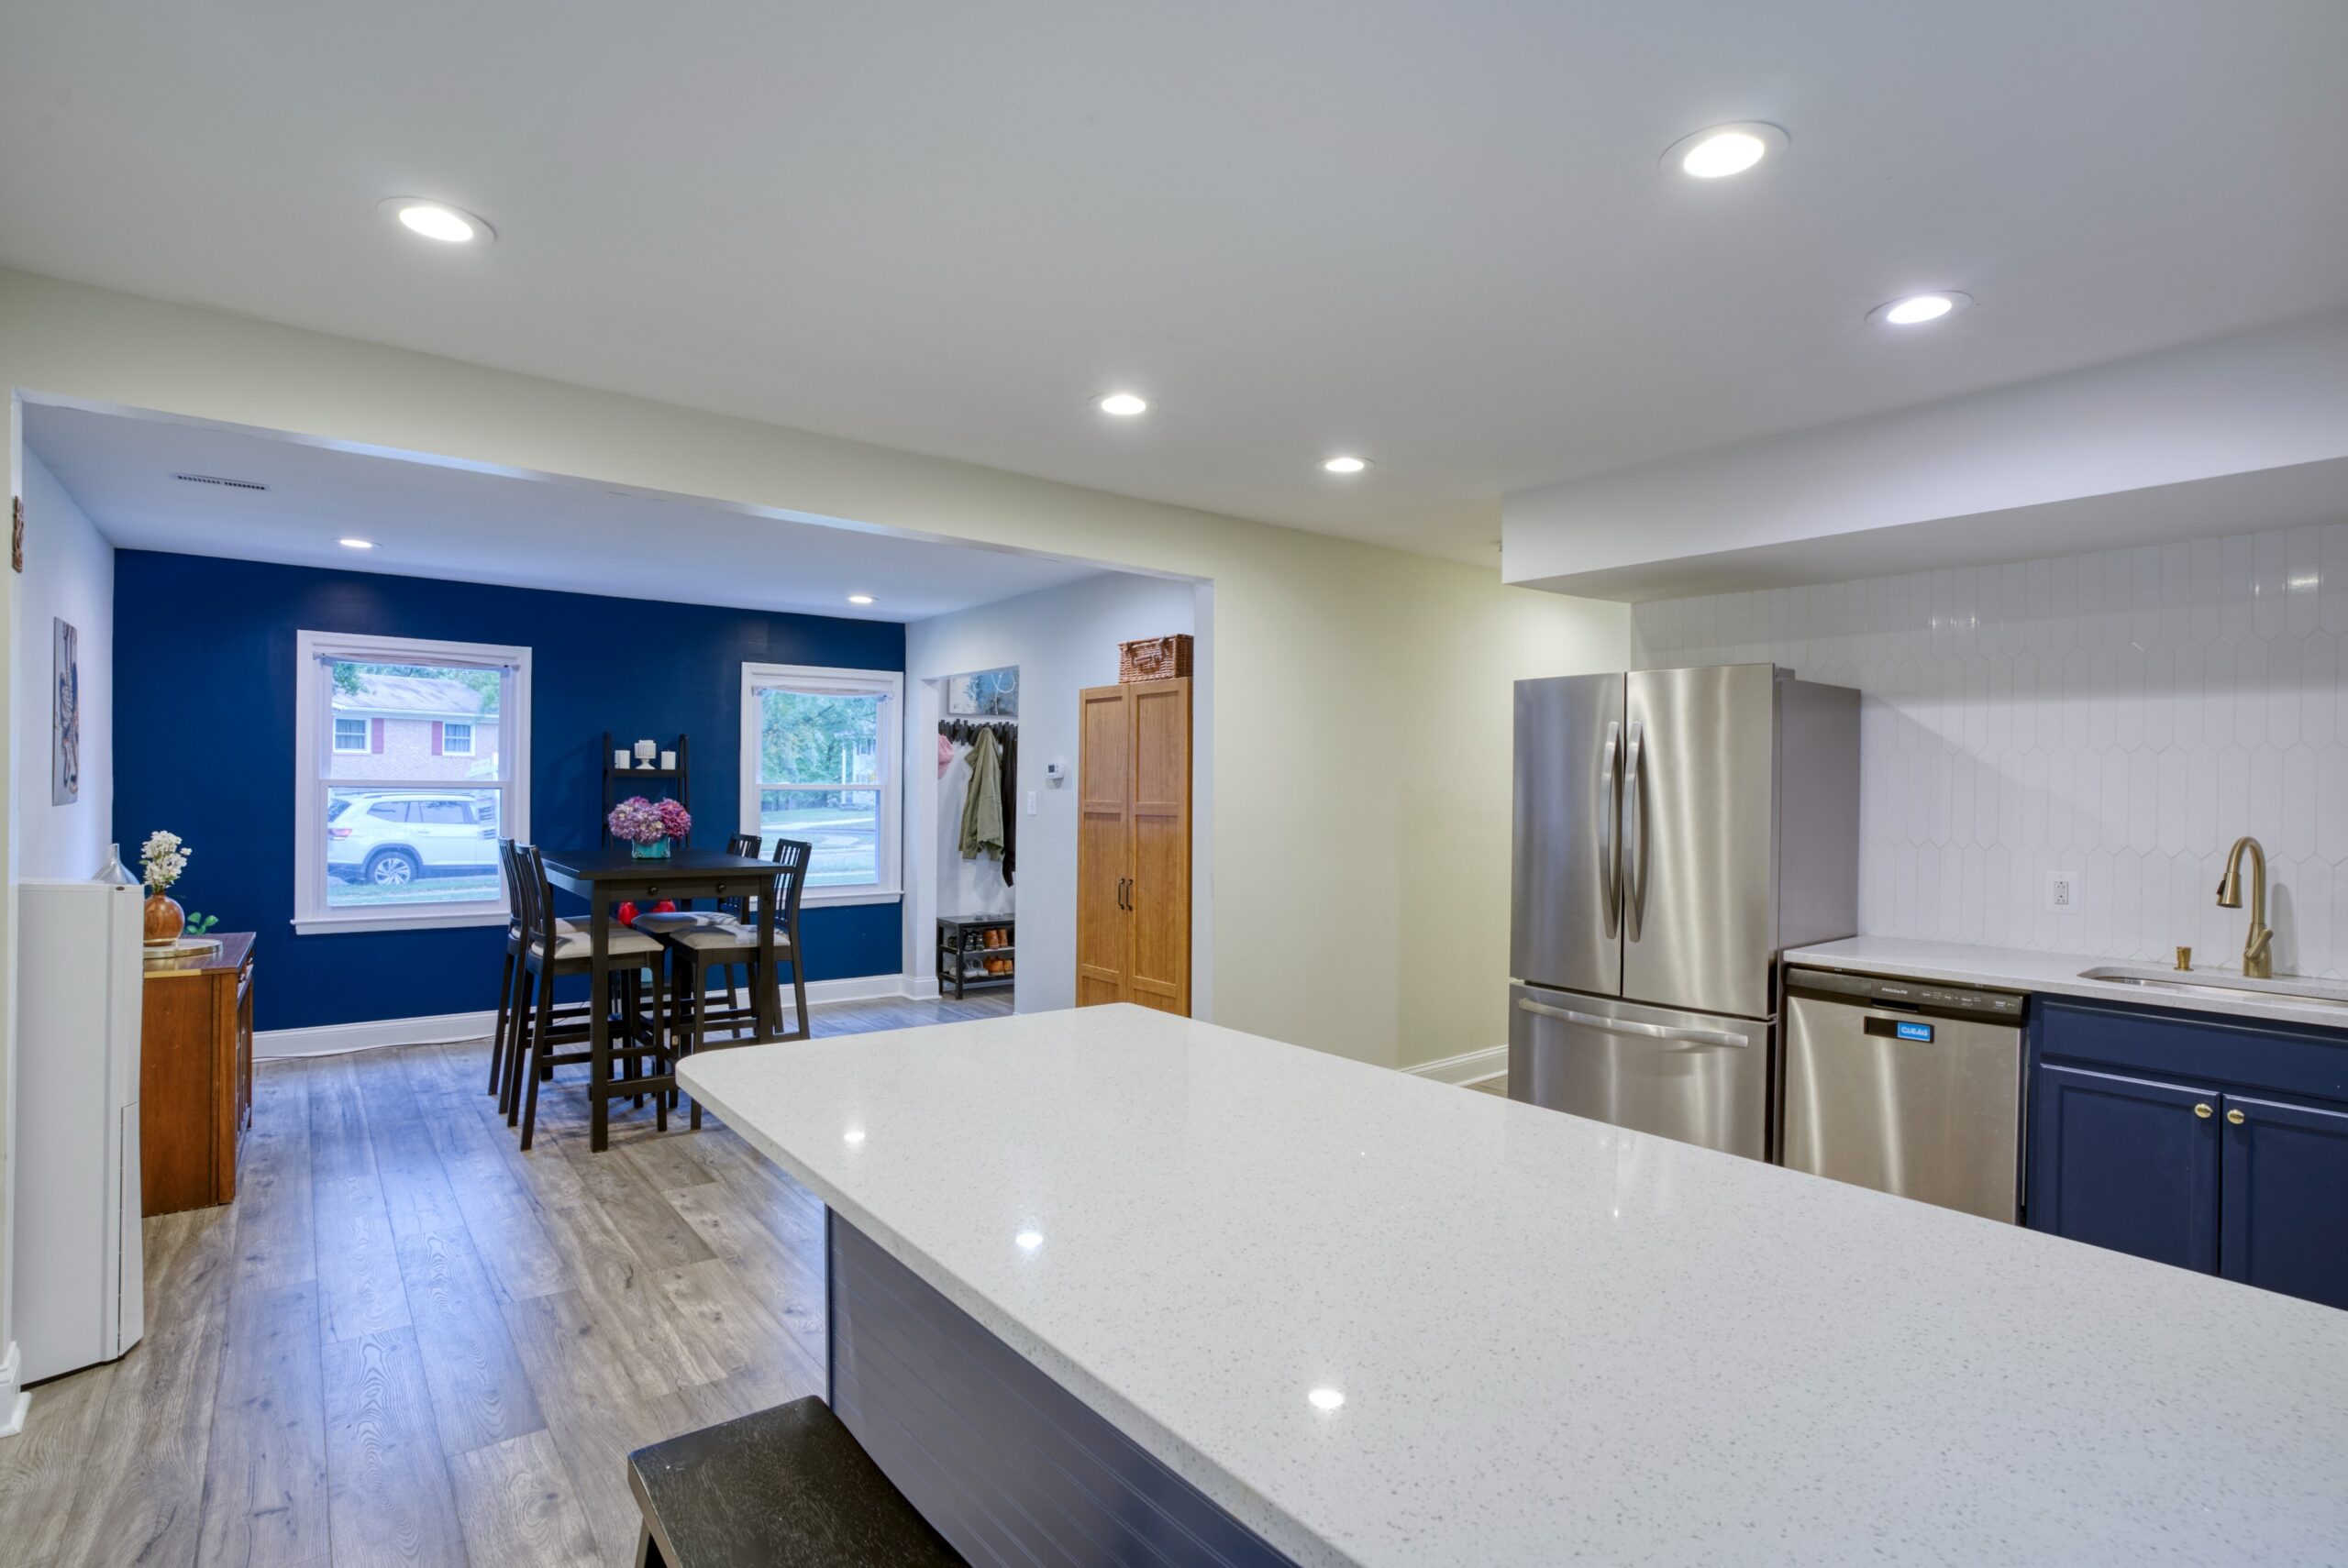 Interior professional photo of 9015 Longbow Rd - showing newly remodeled and upgraded kitchen with stainless appliances, huge quartz peninsula for dining, and navy contrast colors. Glimpse of dining area in background